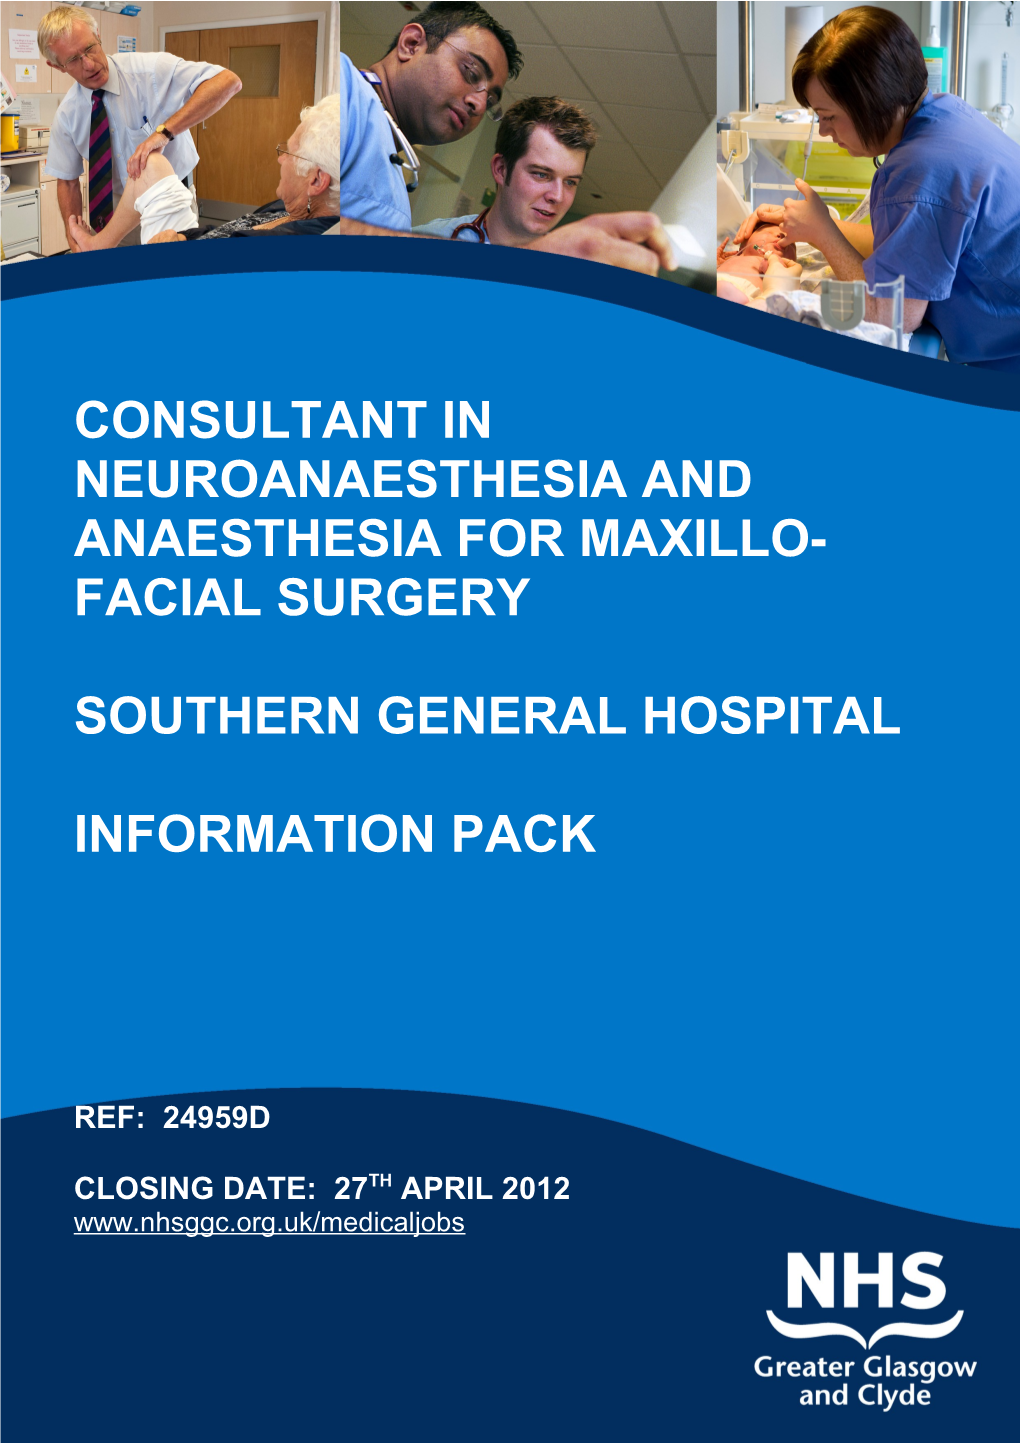 Consultant in Neuroanaesthesia and Anaesthesia for Maxillo-Facial Surgery